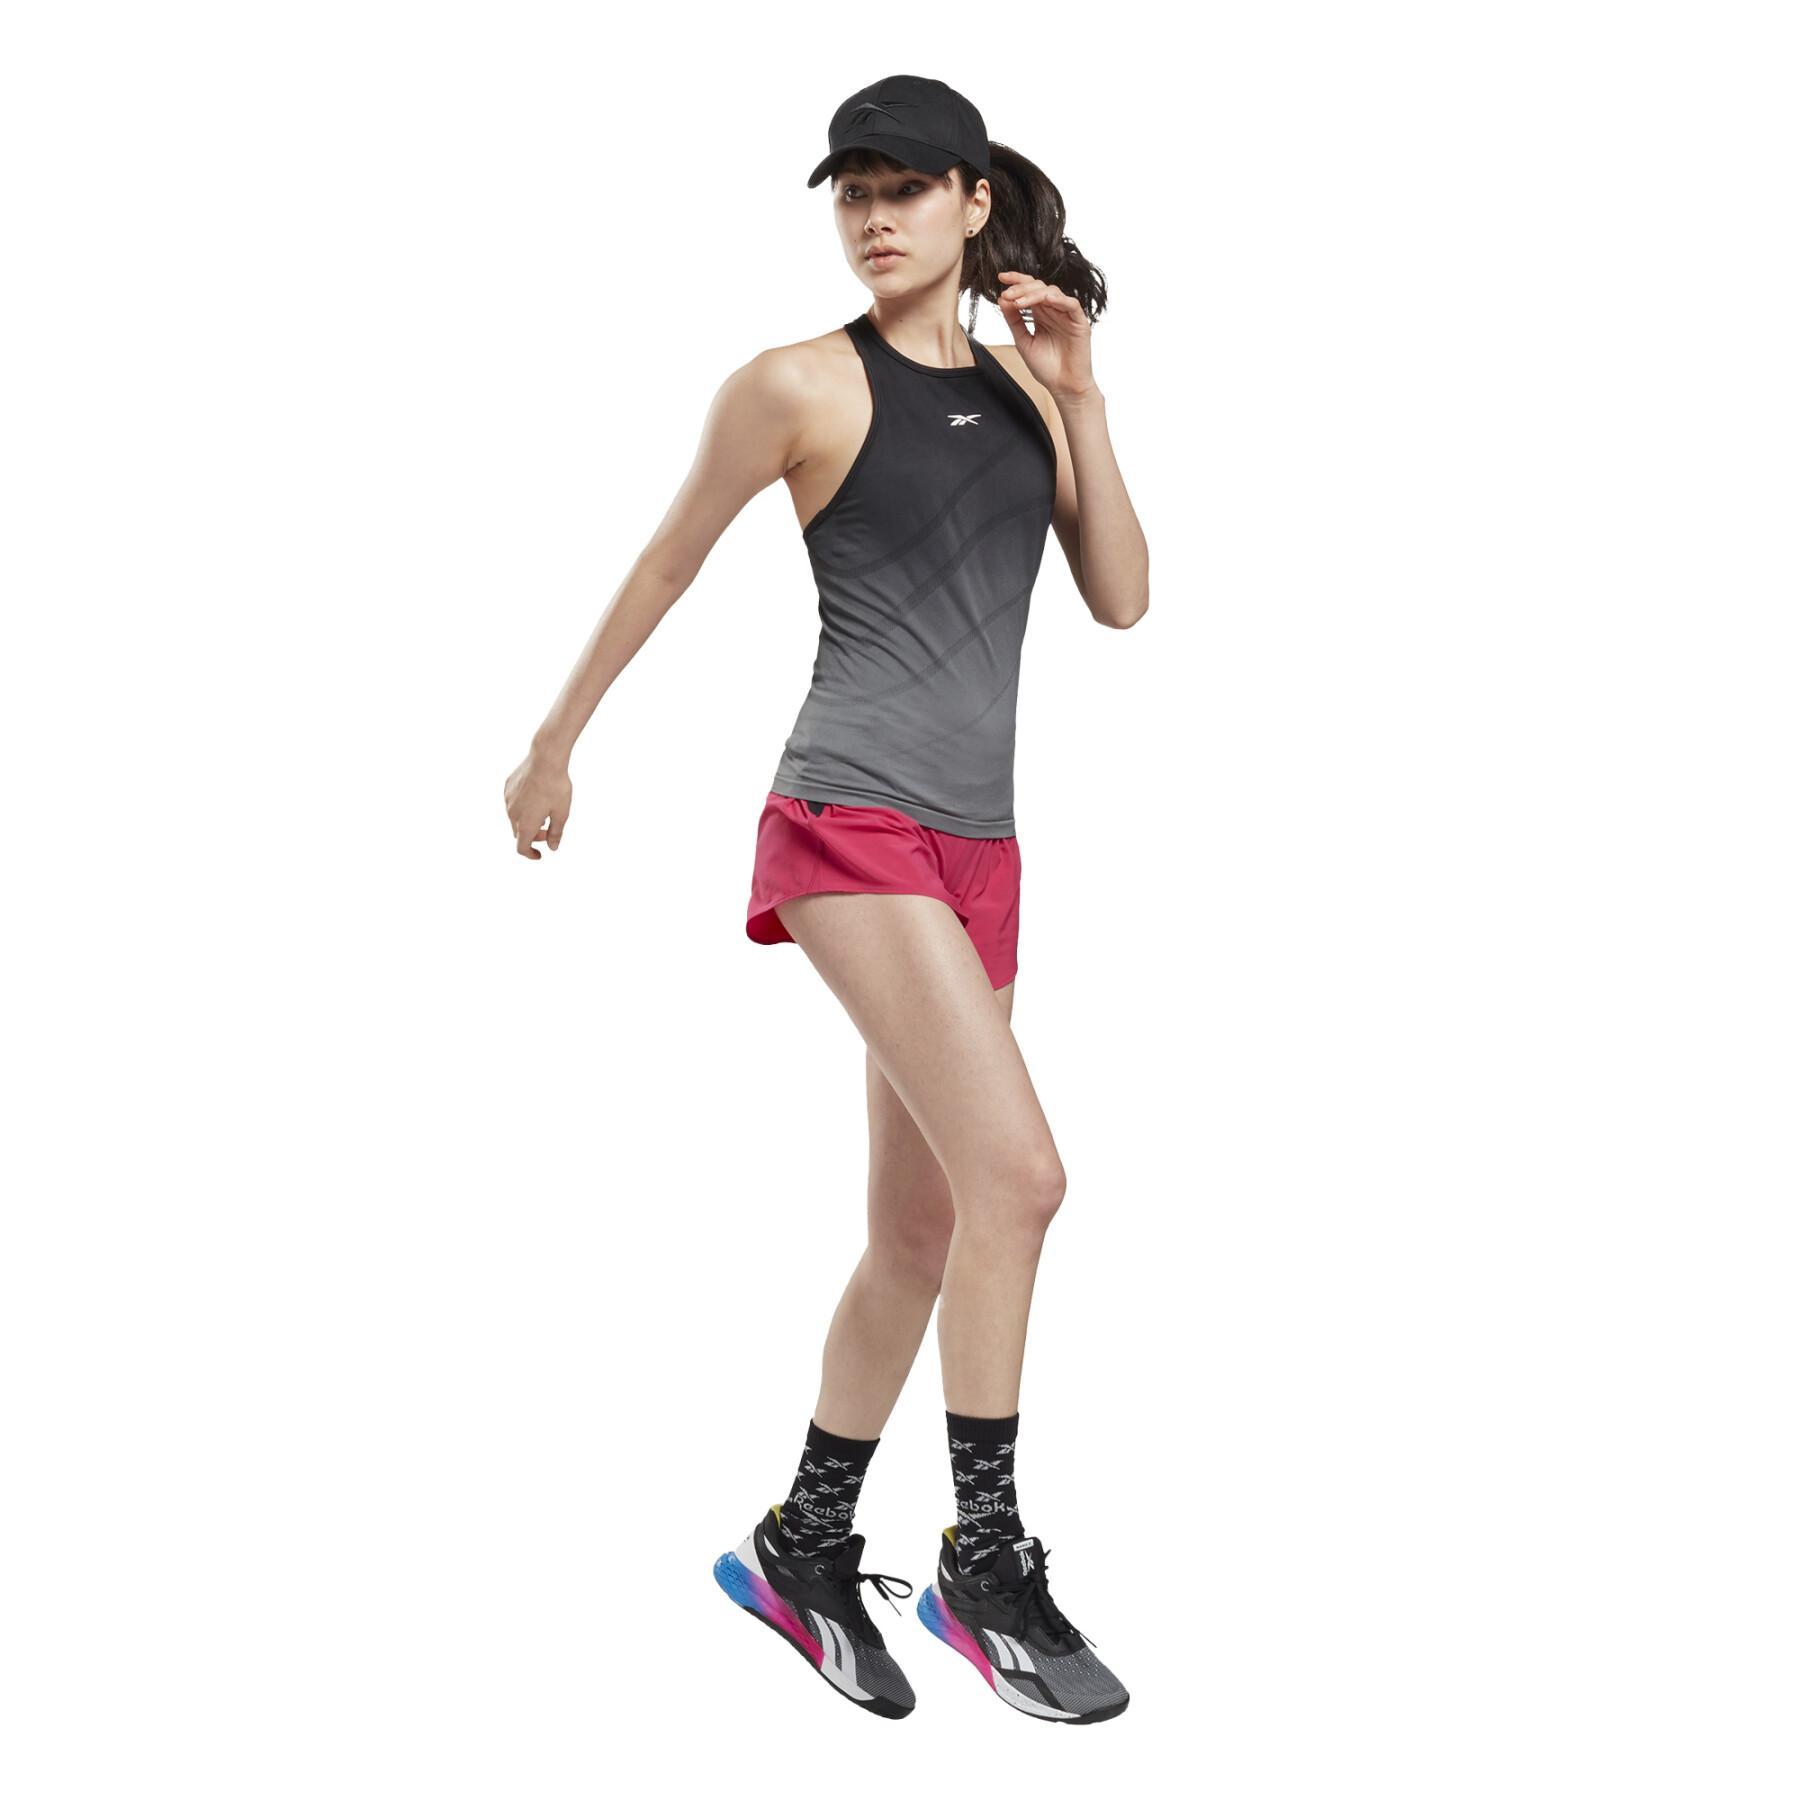 Tampo do tanque feminino Reebok Sans Coutures United By Fitness